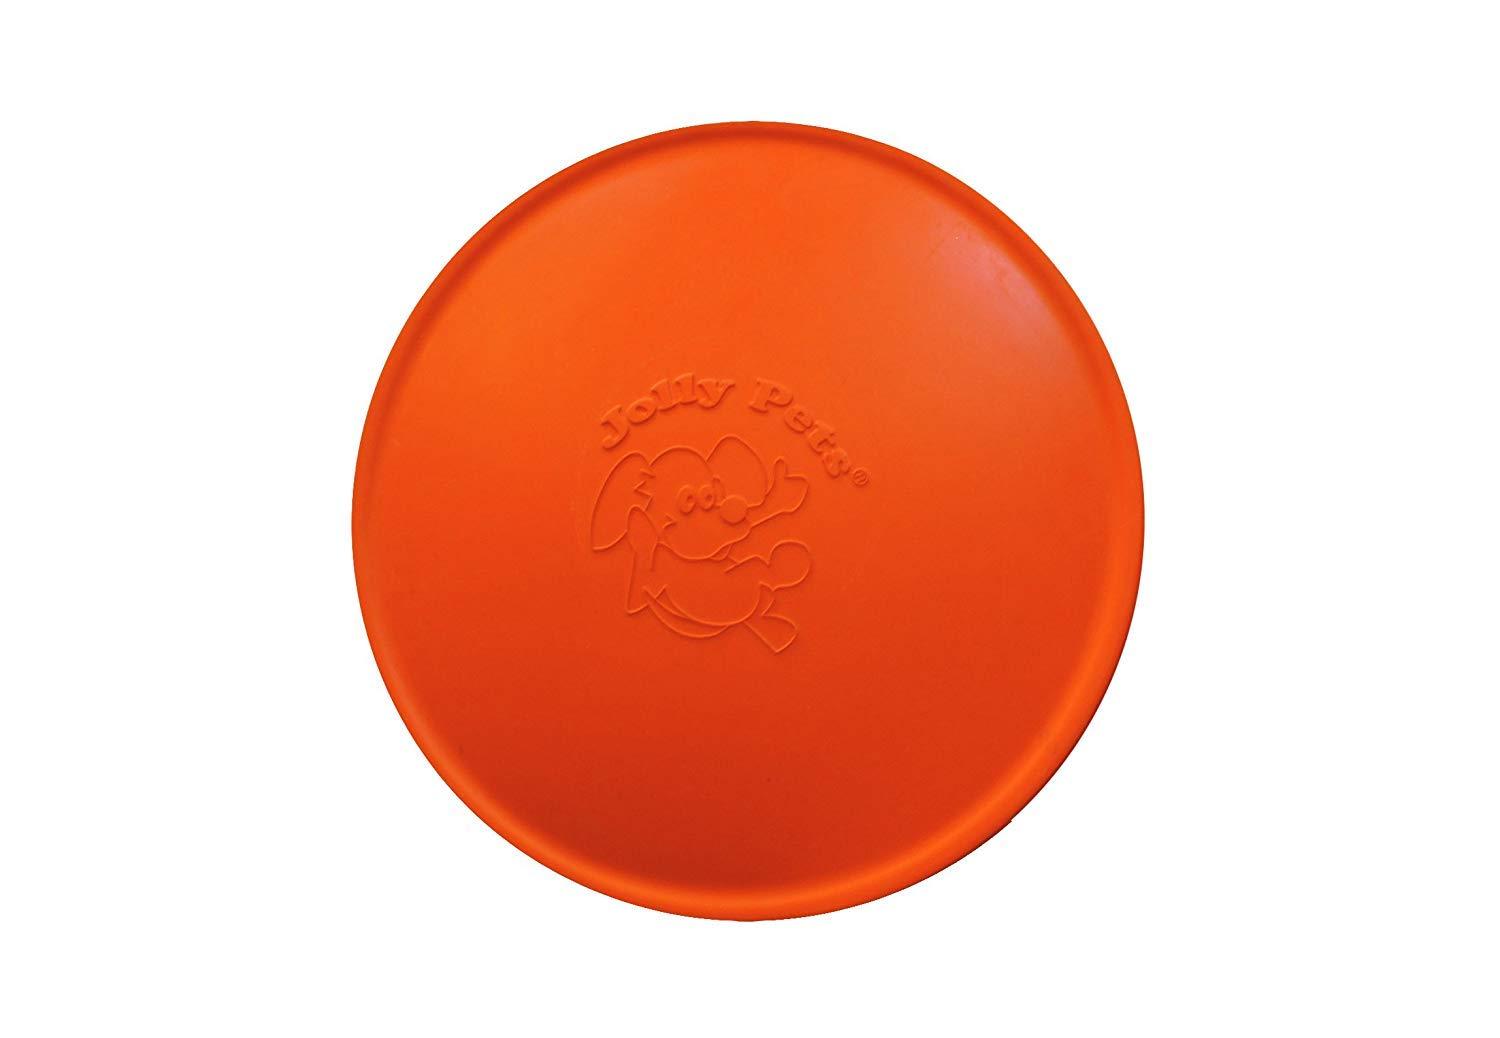 Jolly Pets 3 Pack of Jolly Flyer Rubber Floating Disc, Orange, 9.5-Inch